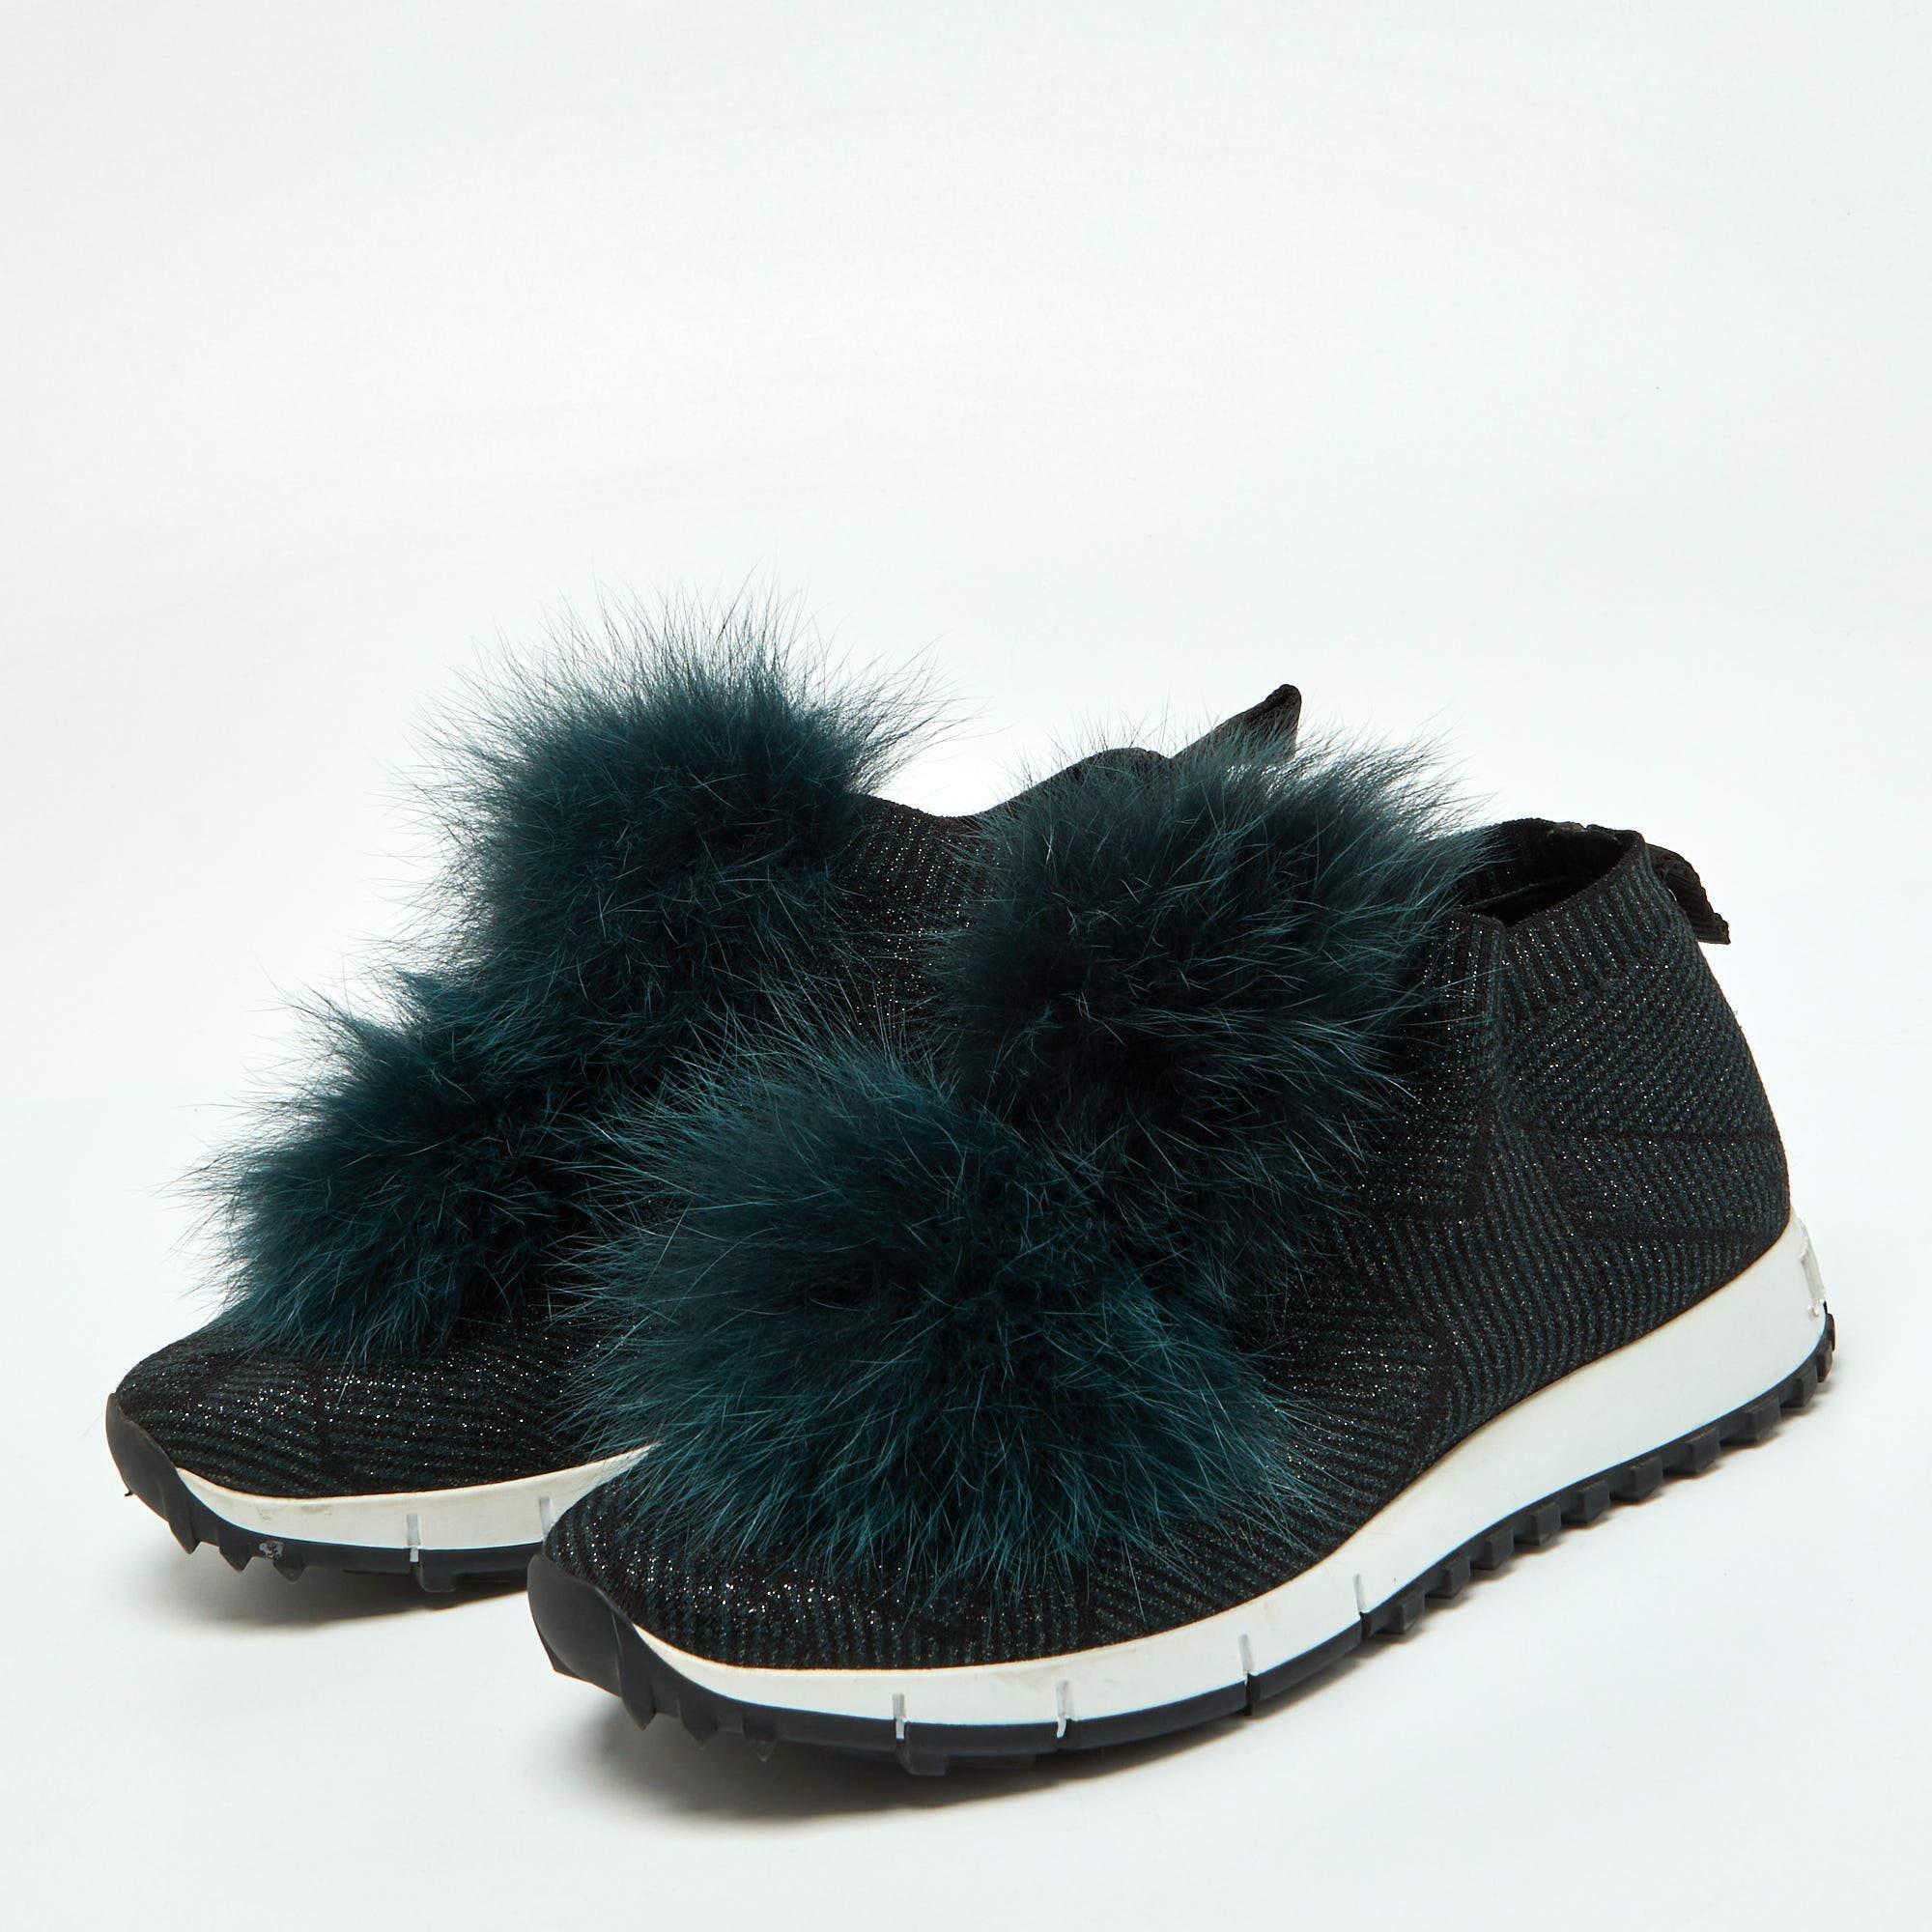 Here is Jimmy Choo's fun take on sneakers! Crafted in knit fabric, the low-top sneakers have a slip-on style and statement fur pom-pom details on the uppers. Try them on with dresses as well as jeans for a unique twist.

